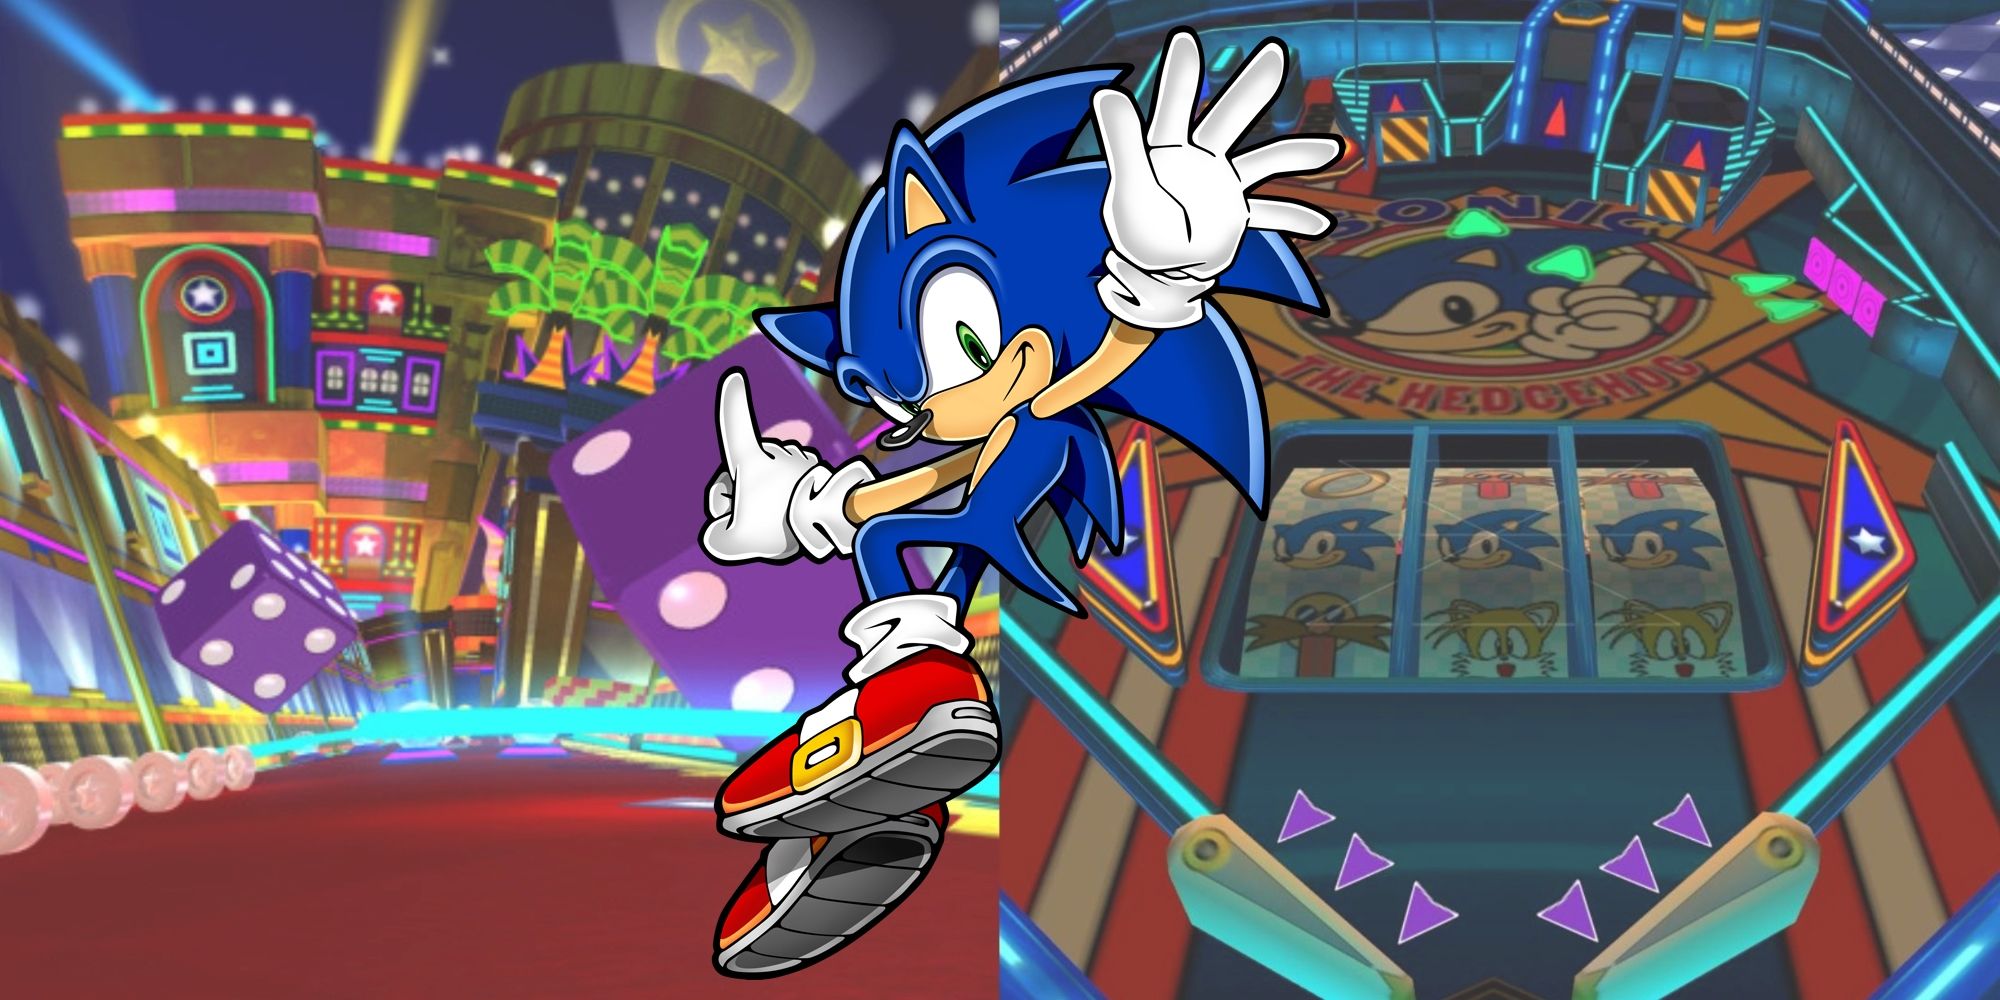 Sonic posing in front of scenes from Frozen Factory Act 3 and Casinopolis